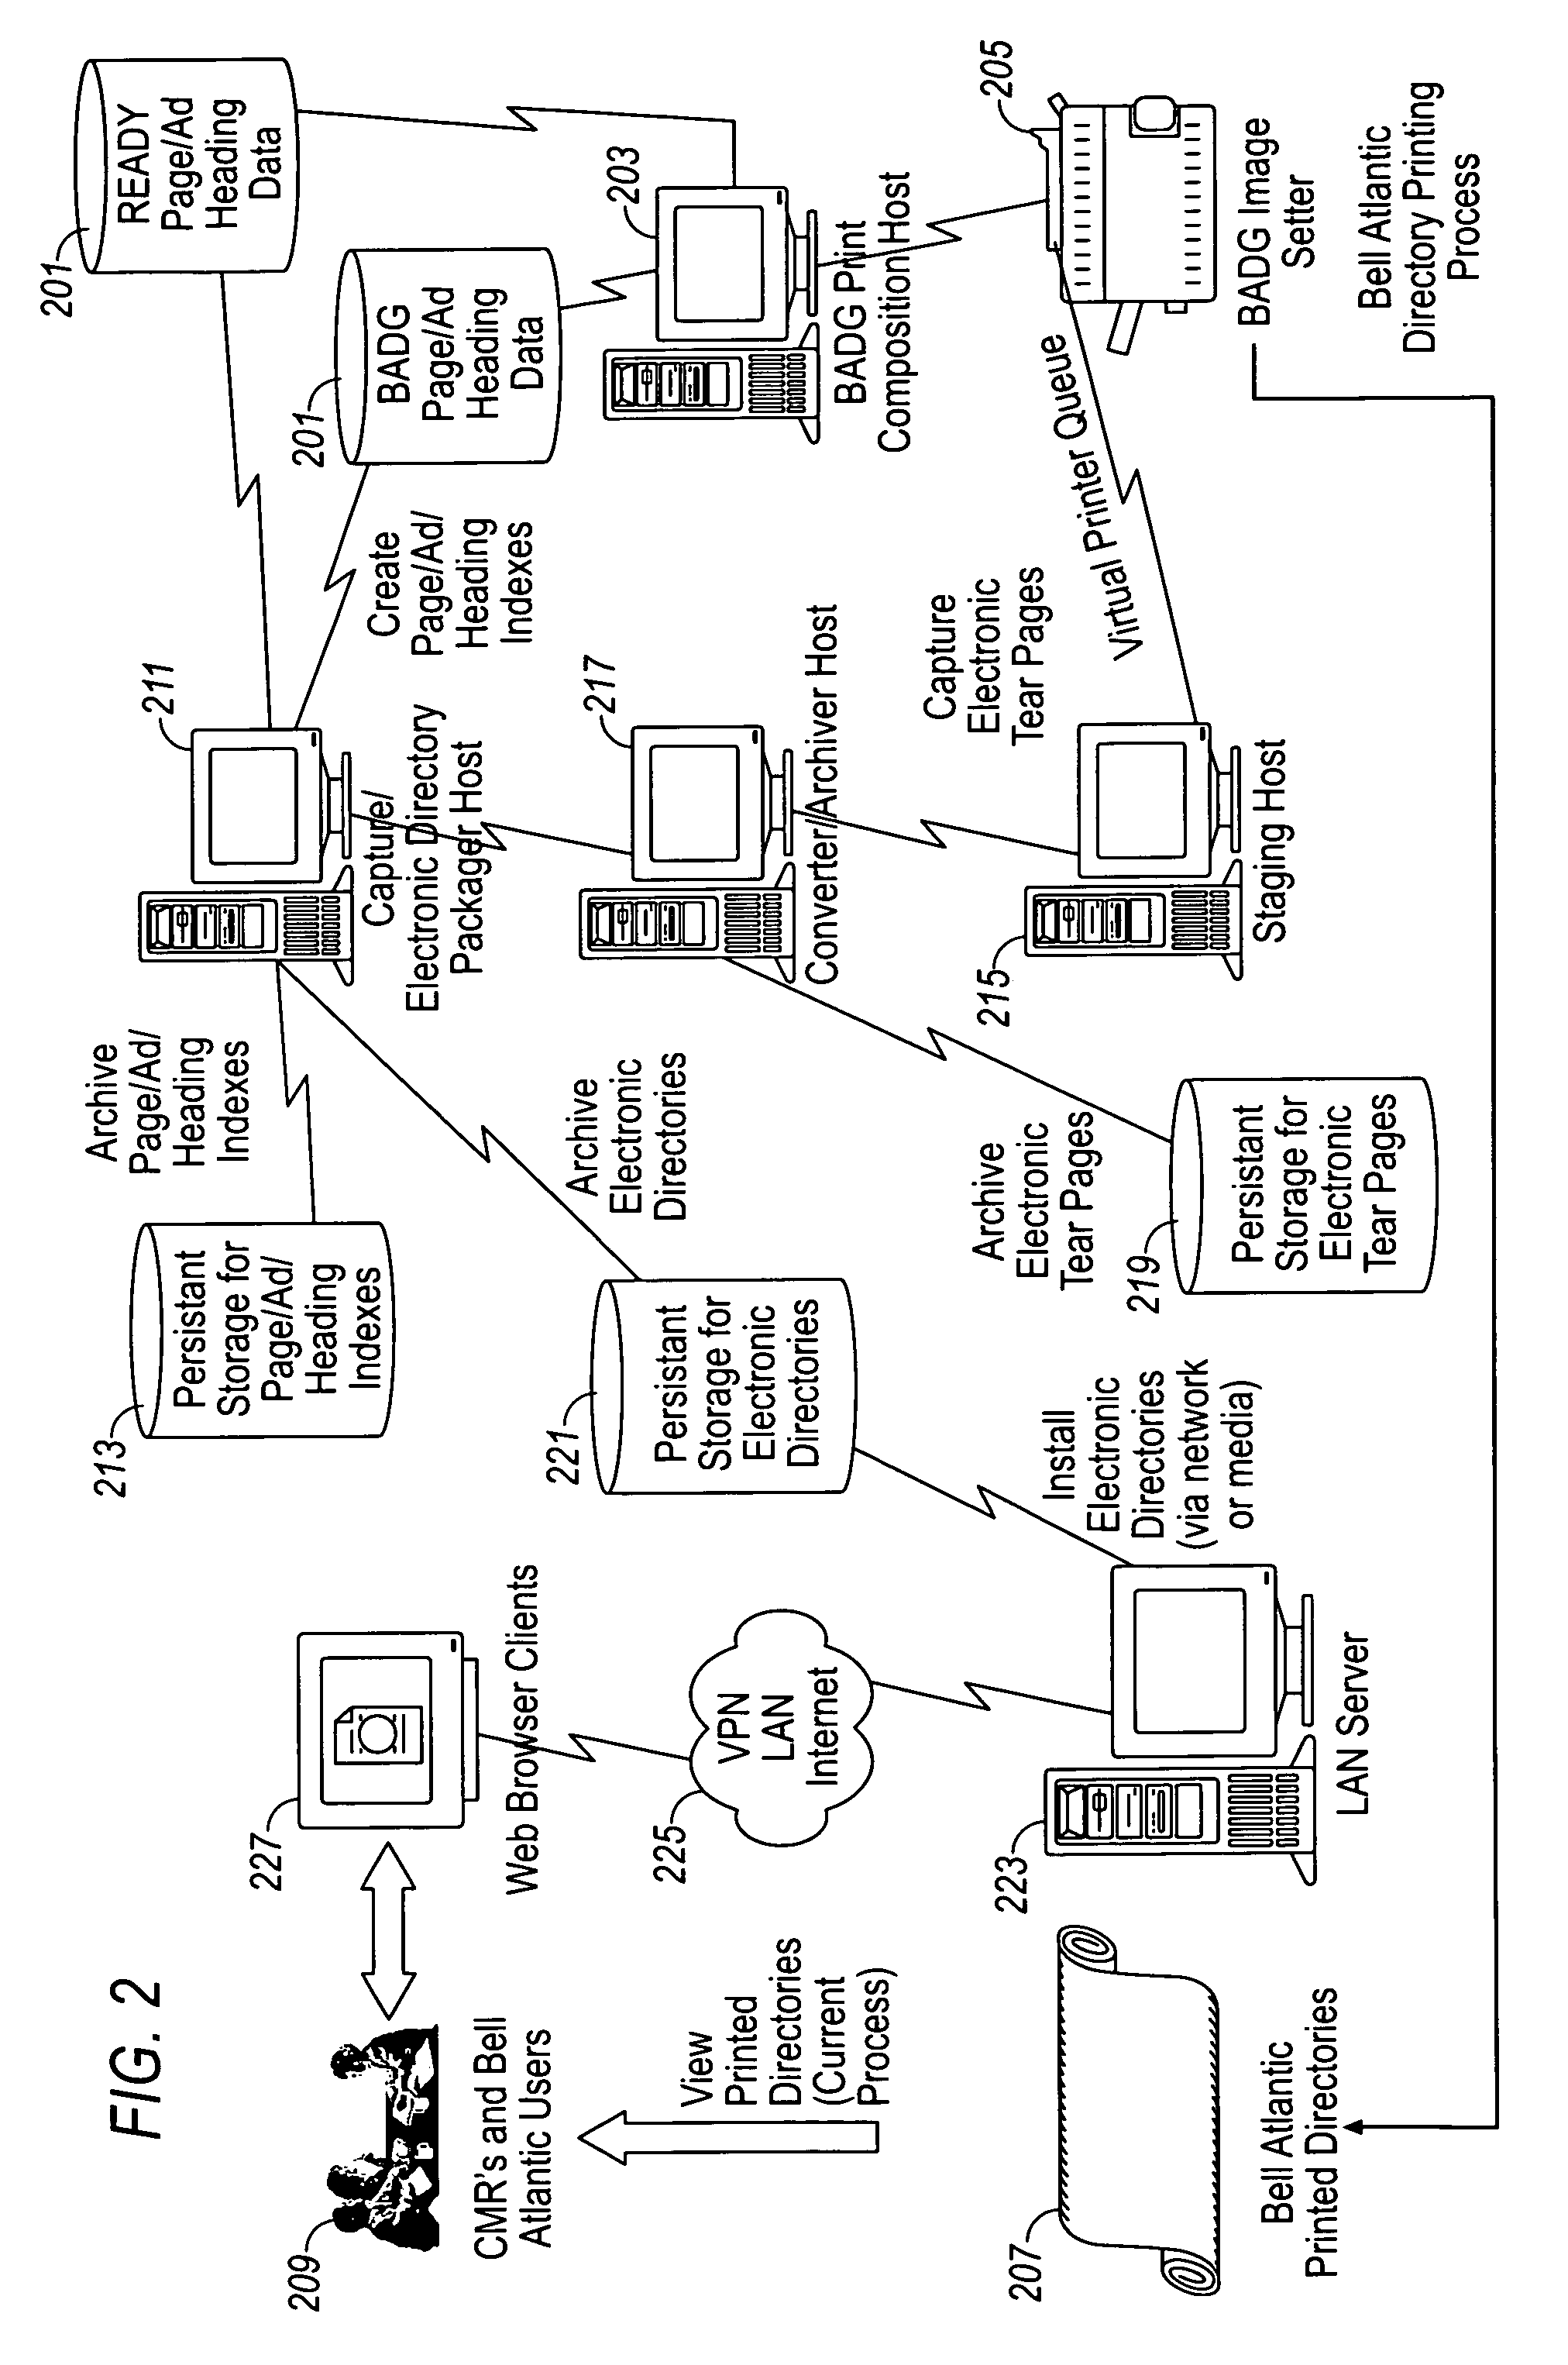 Method, storage medium and system for electronically viewing multi-page document while preserving appearance of printed pages